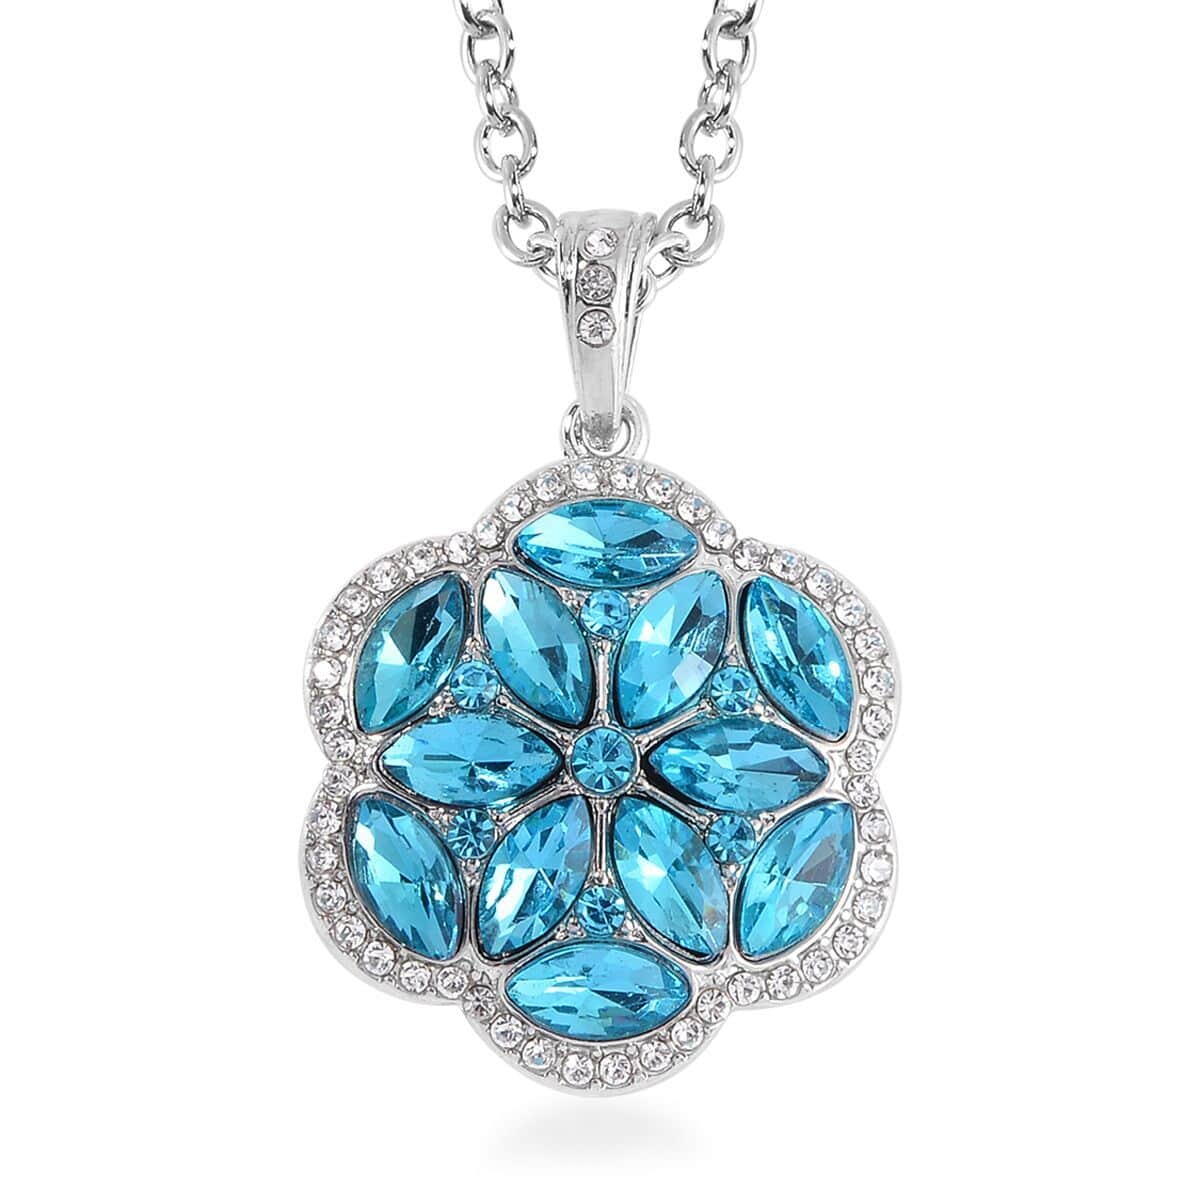 Sky Blue Color and White Austrian Crystal, Faux Leather Floral Bracelet (6-8In), Earrings, Ring (Size 8.0) and Pendant Necklace 20-22 Inches In Silvertone image number 5